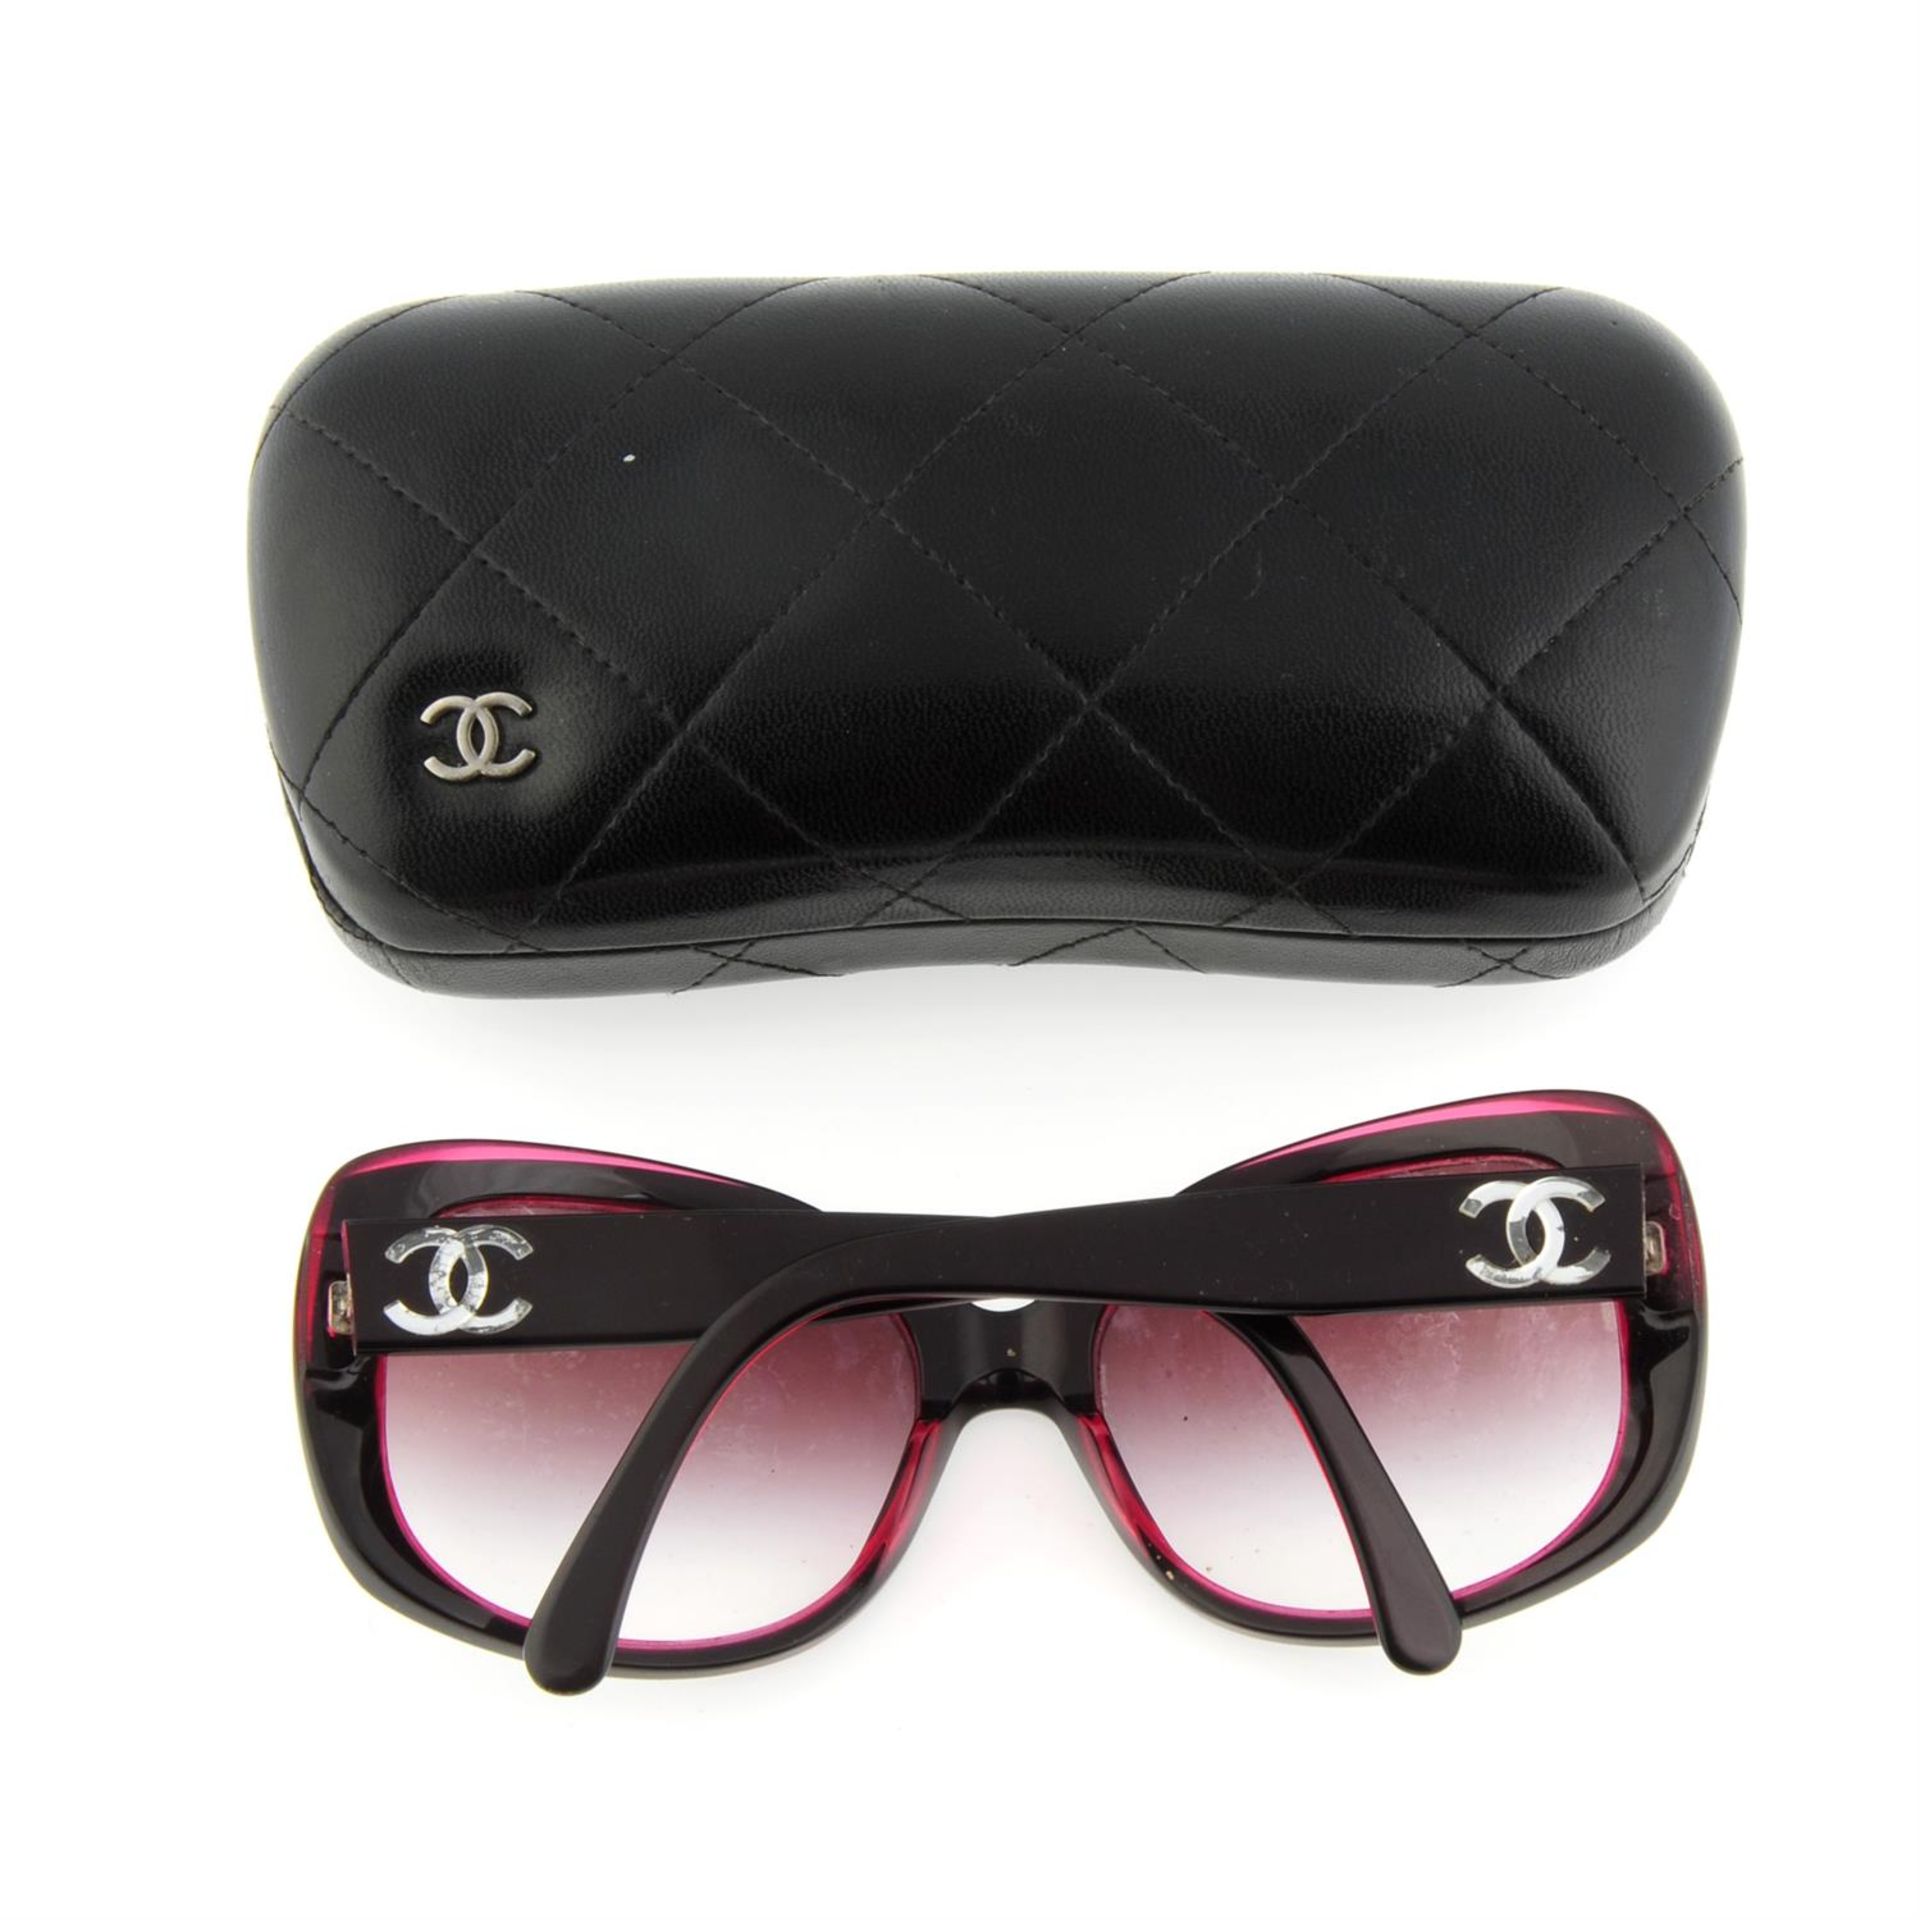 CHANEL - a pair of sunglasses. - Image 2 of 2